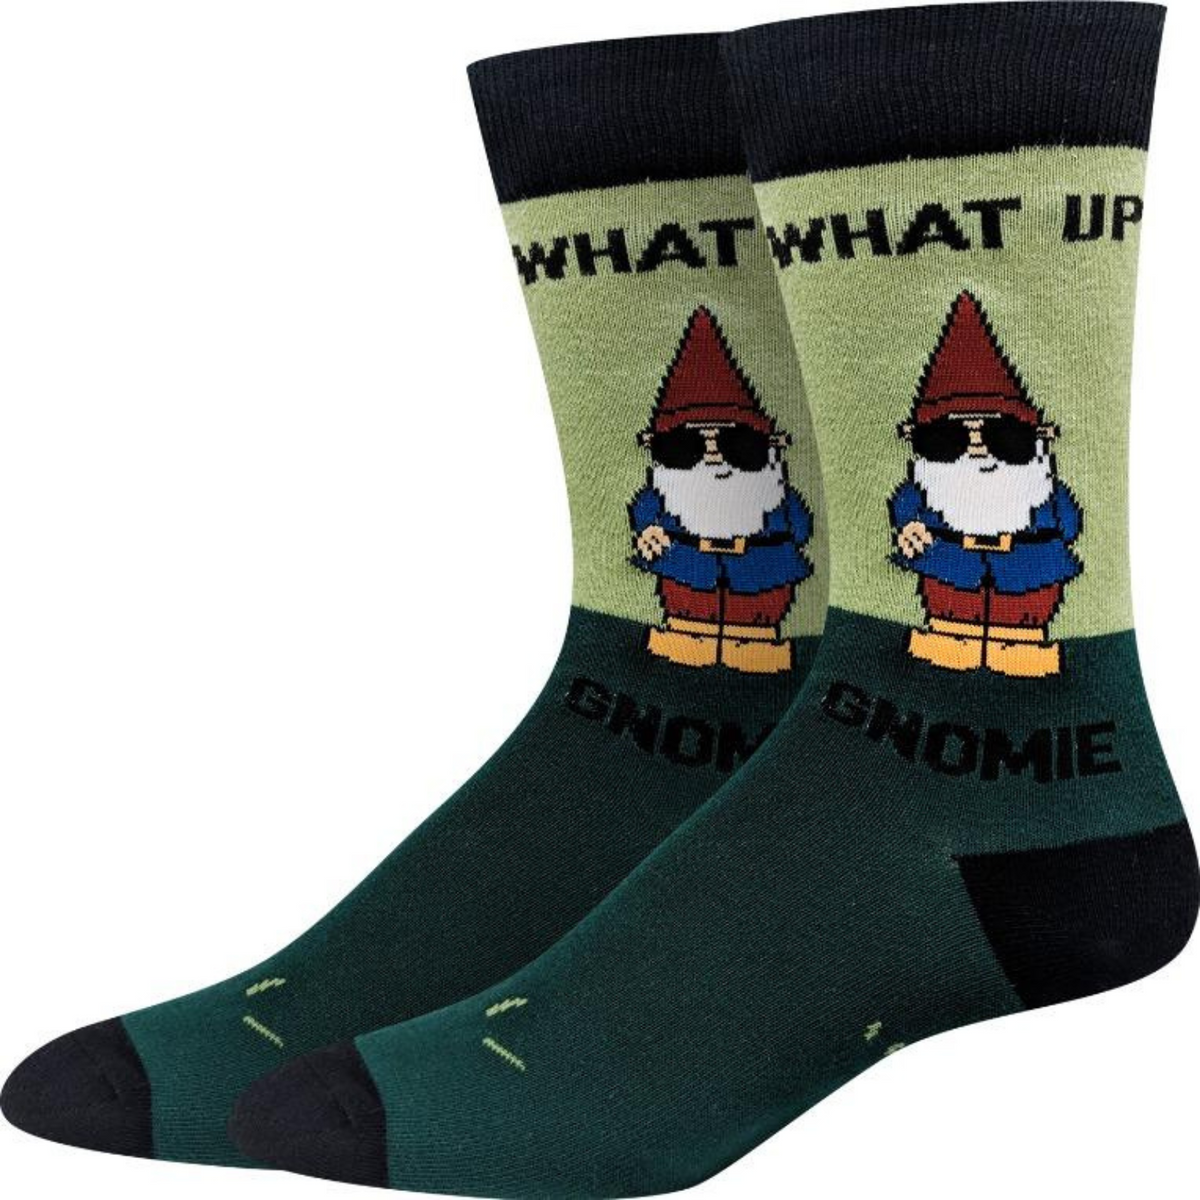 Sock Harbor What Up Gnomie men&#39;s sock in gray featuring green sock with black toe, cuff and heel with Gnome wearing sunglasses